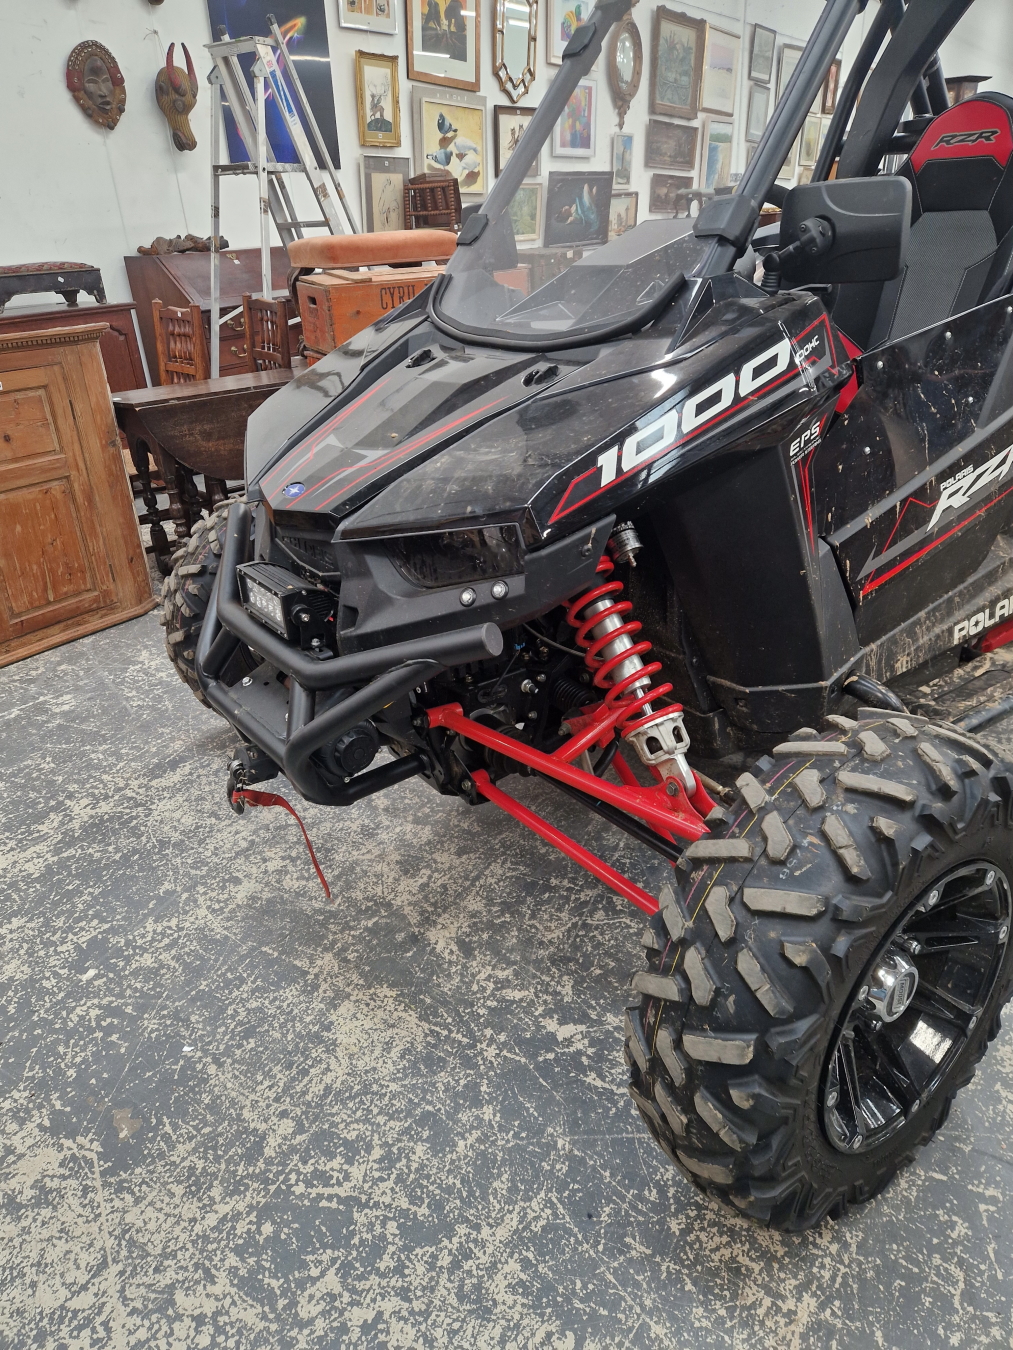 POLARIS RZR RSI 1000 ON /OFF ROAD BUGGY. 2020. FULLY ROAD LEGAL AND IN EXCELLENT CONDITION. WITH - Image 3 of 13